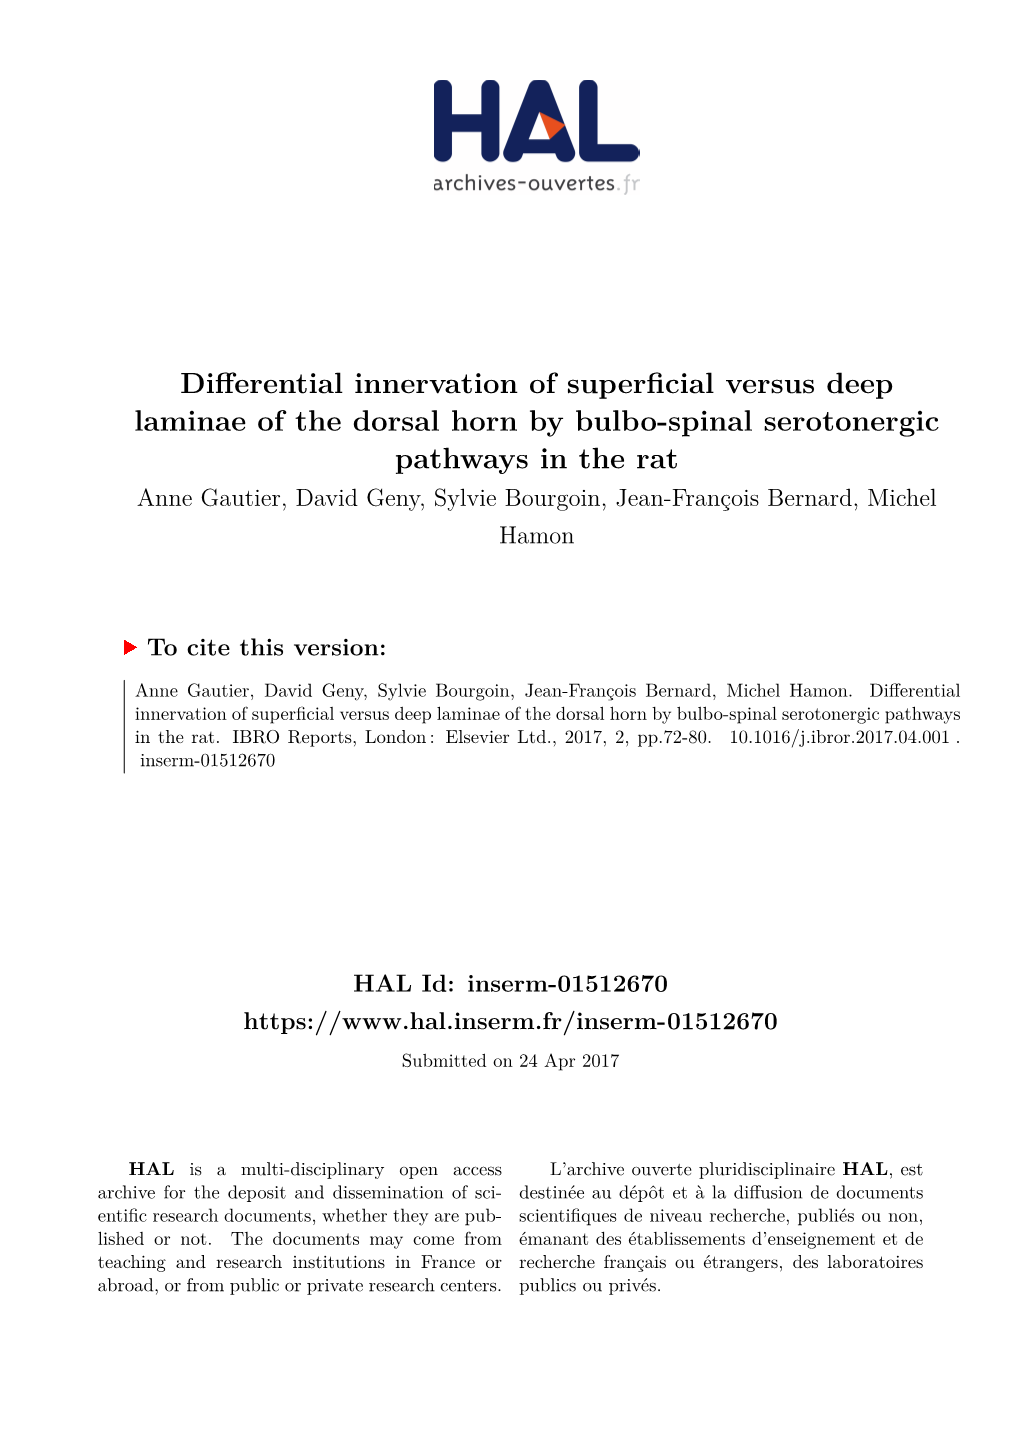 Differential Innervation of Superficial Versus Deep Laminae of the Dorsal